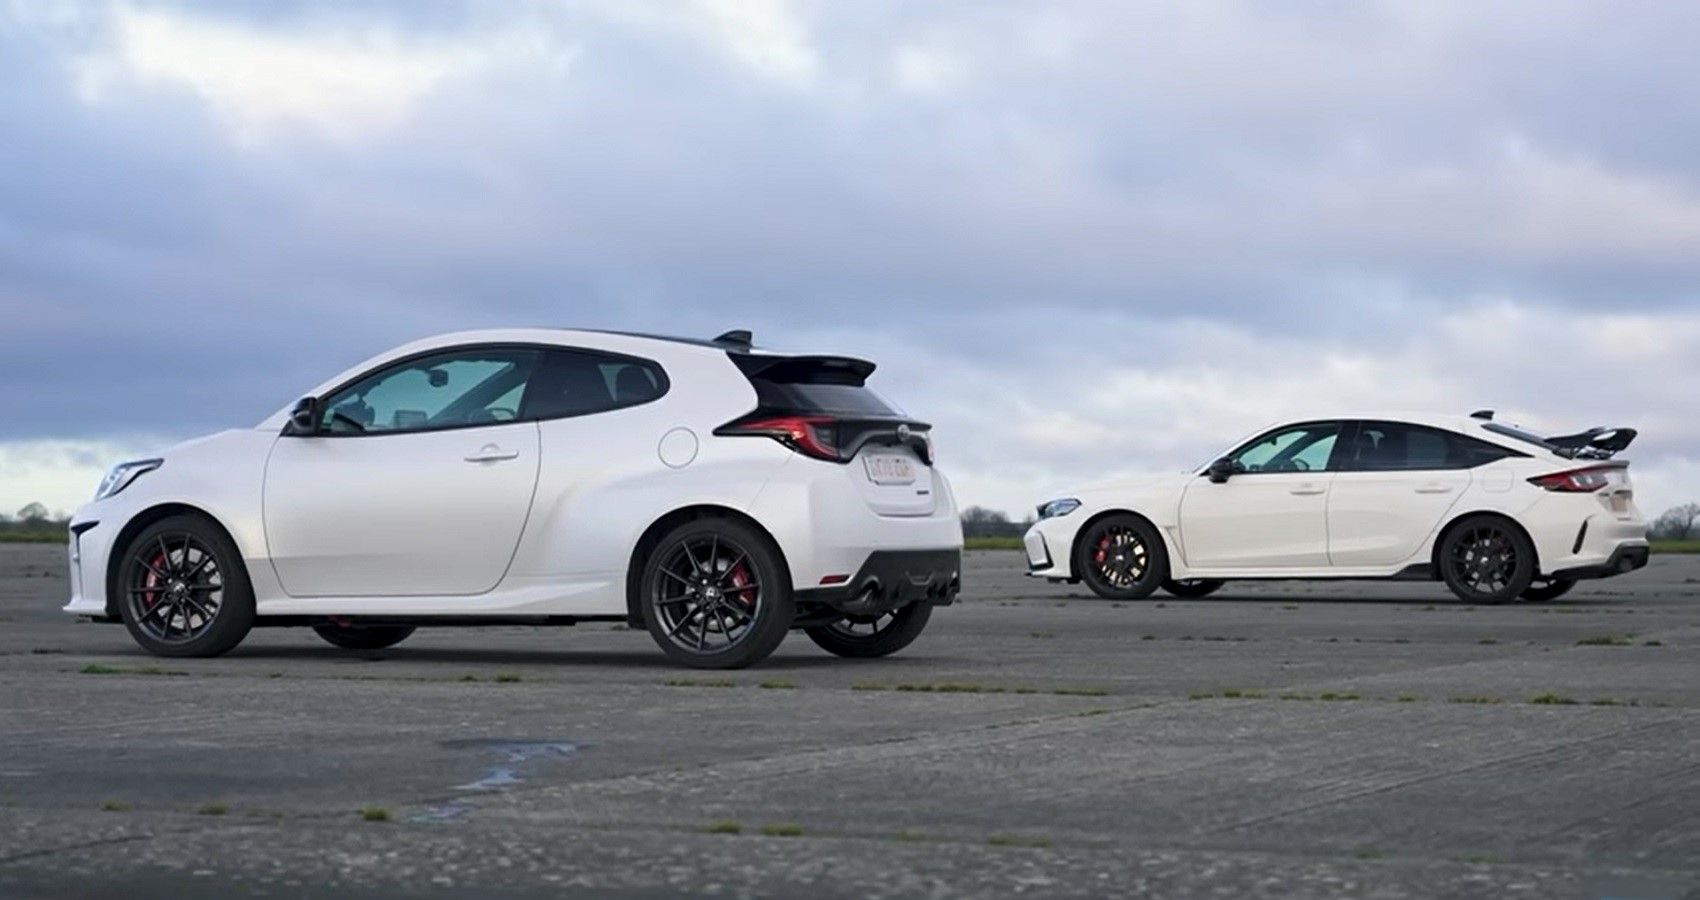 Toyota GR Yaris and Honda Civic Type R, white, side by side